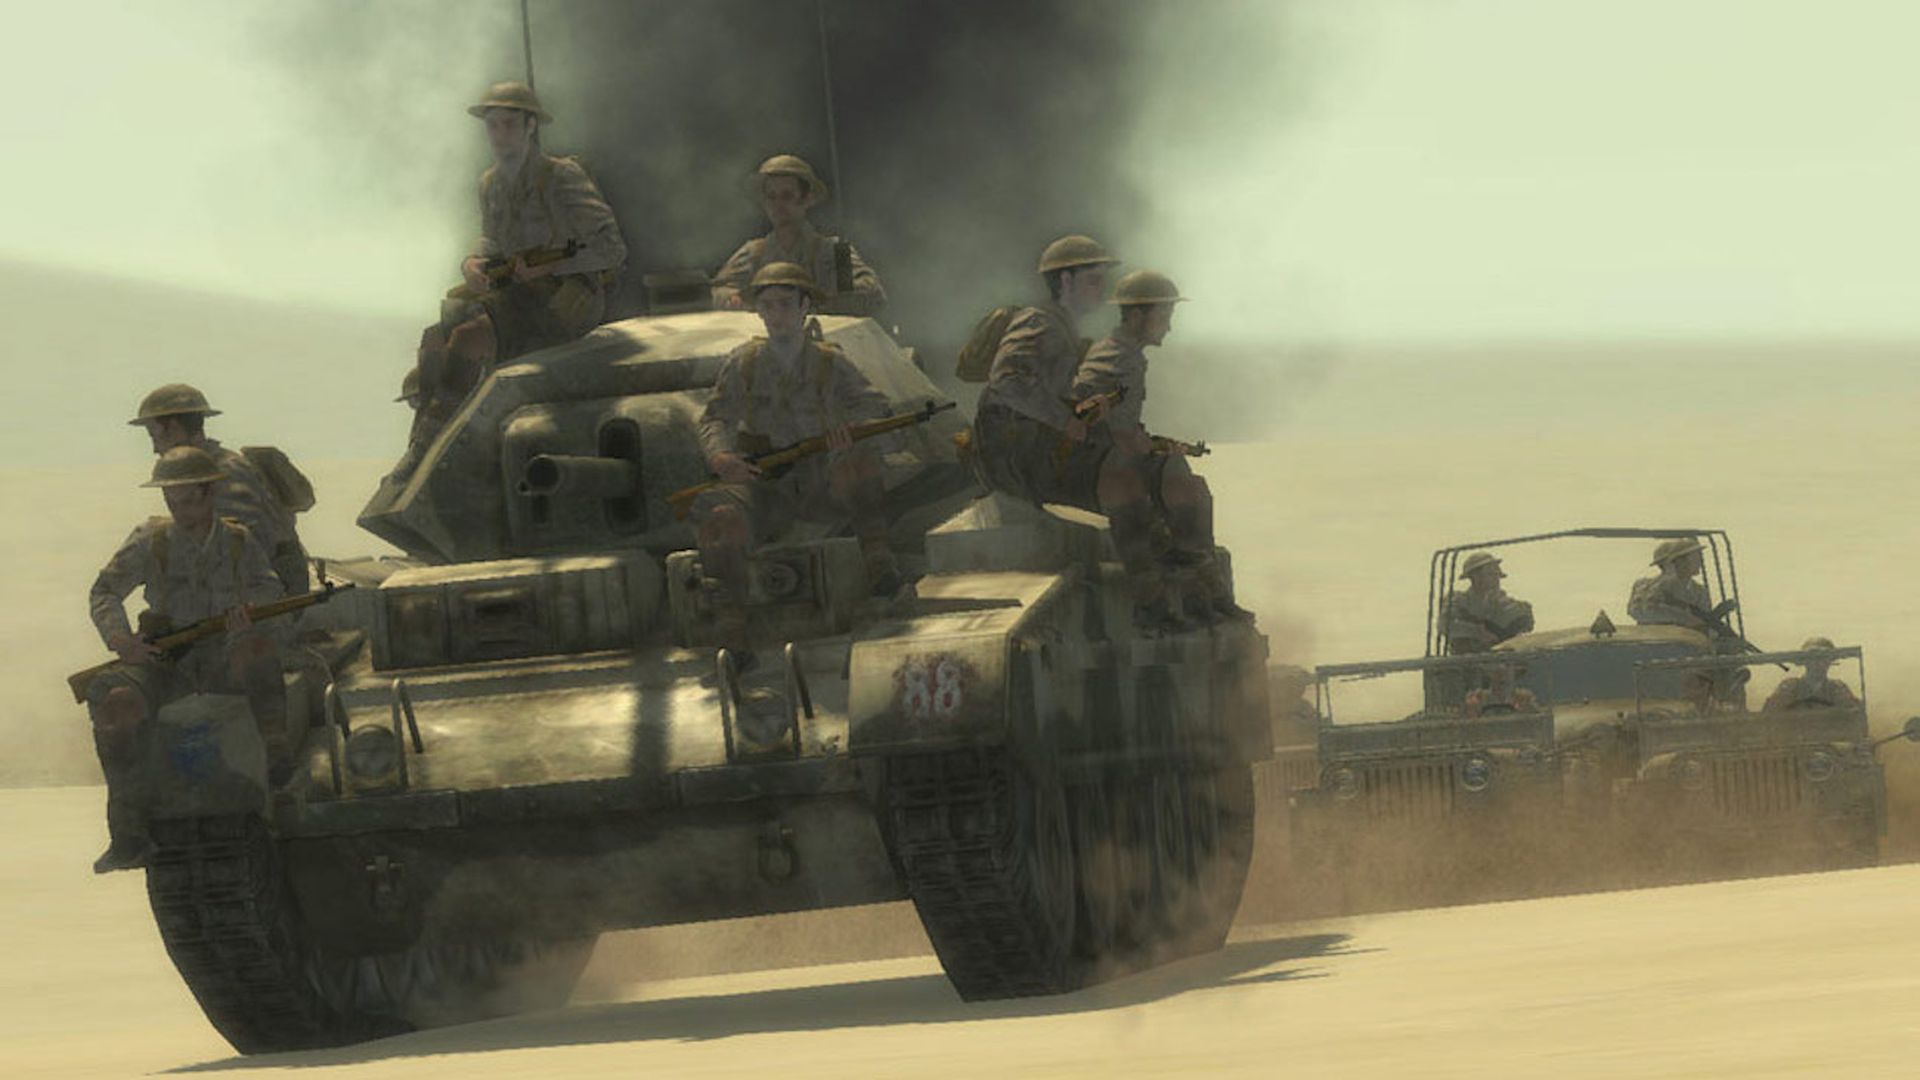 Video game screenshot of soldiers on a tank in the desert